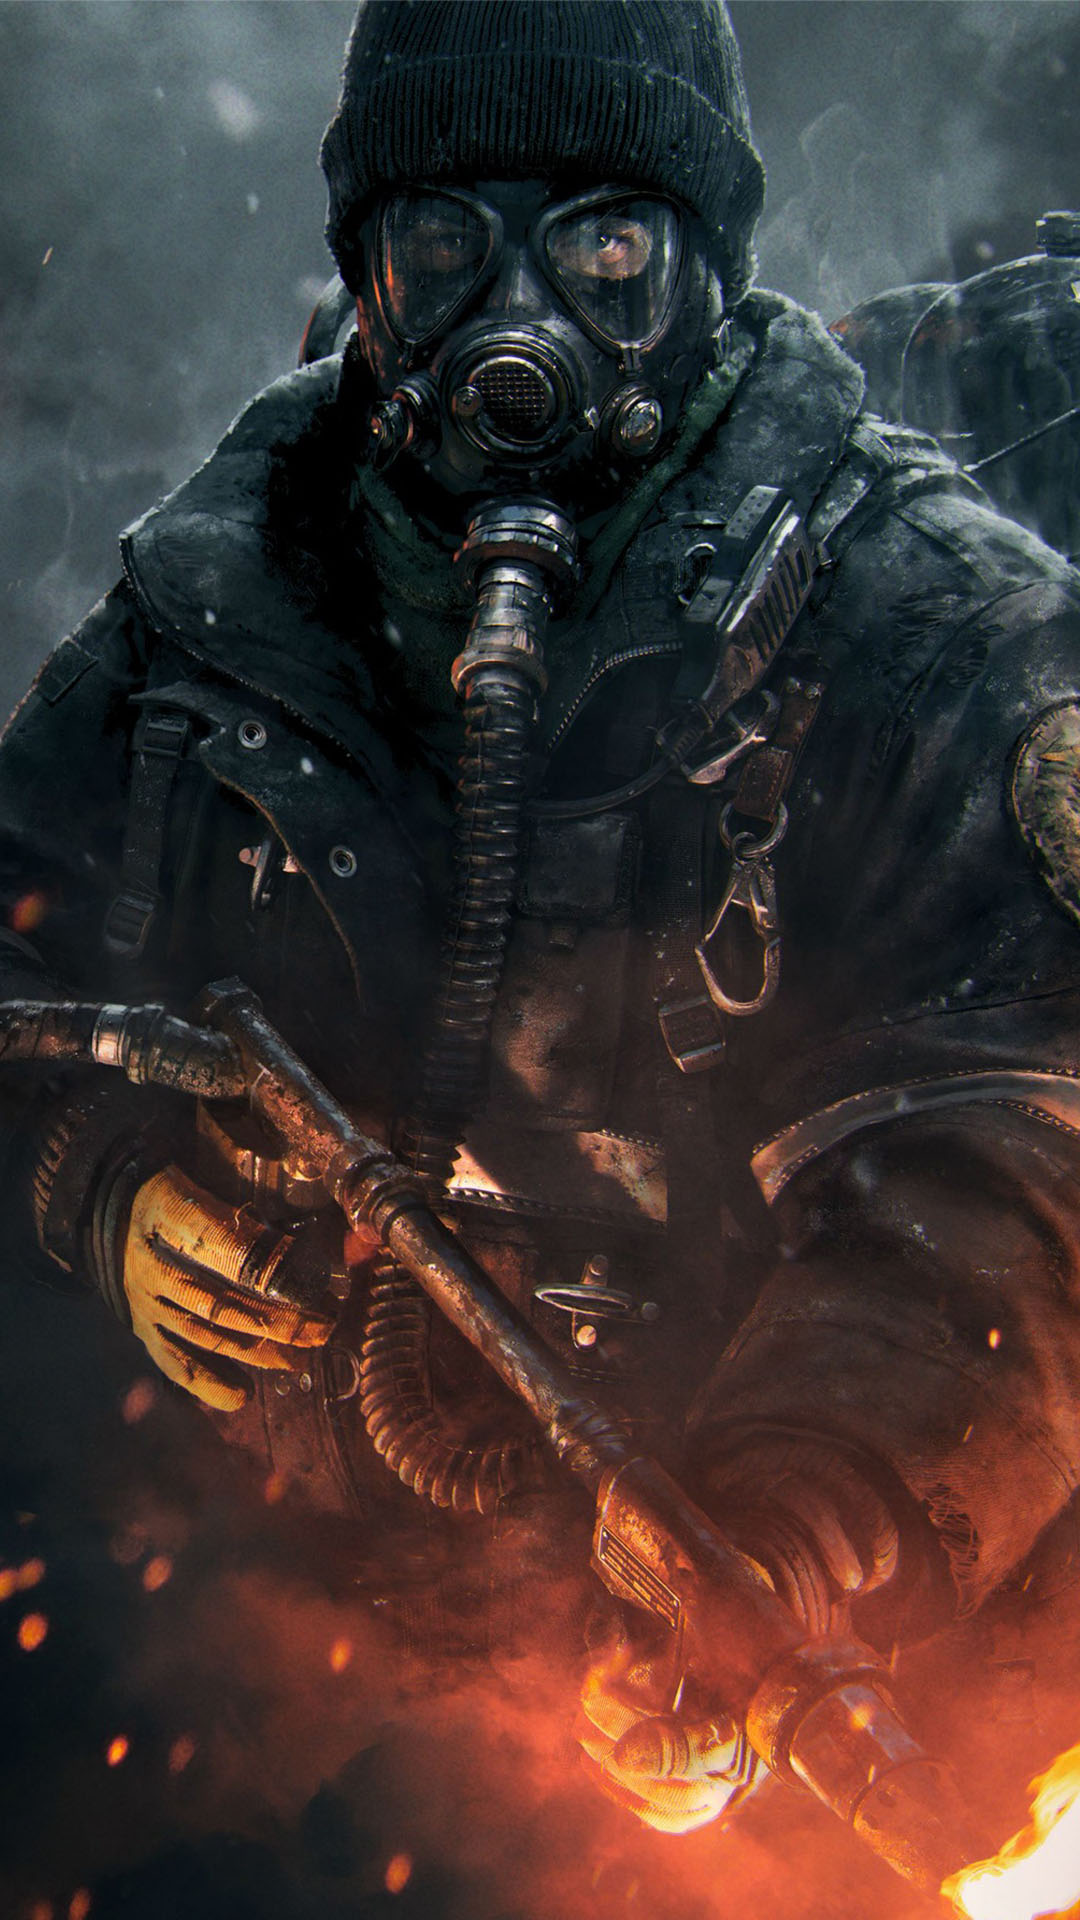 Free Download Tom Clancys The Division Iphone 6 6 Plus And Iphone 54 Wallpapers 1080x19 For Your Desktop Mobile Tablet Explore 49 The Division Phone Wallpaper The Division Wallpaper